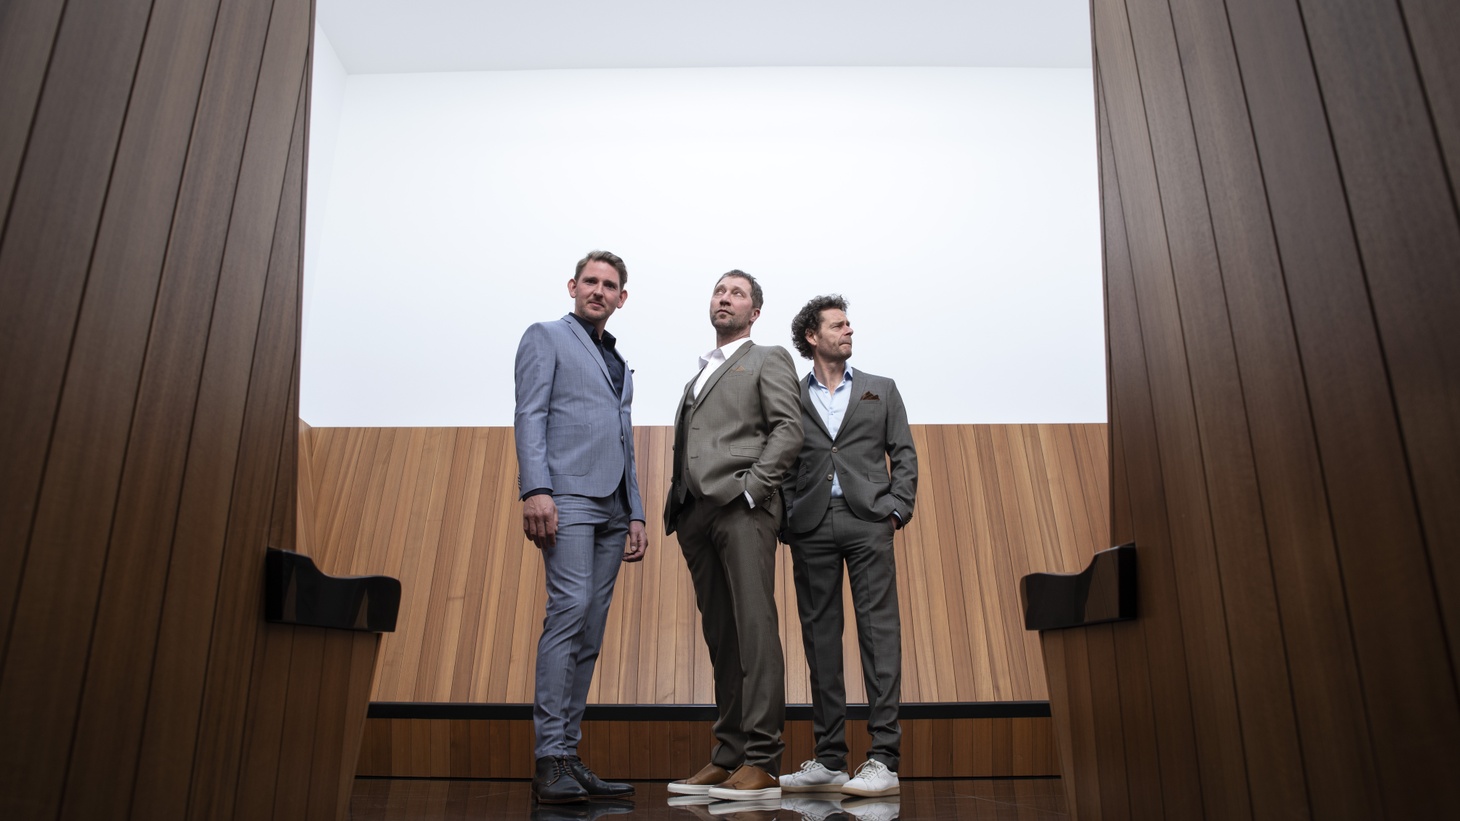 Interview with Kraak & Smaak: “Our album was inspired by the chill West Coast vibes”